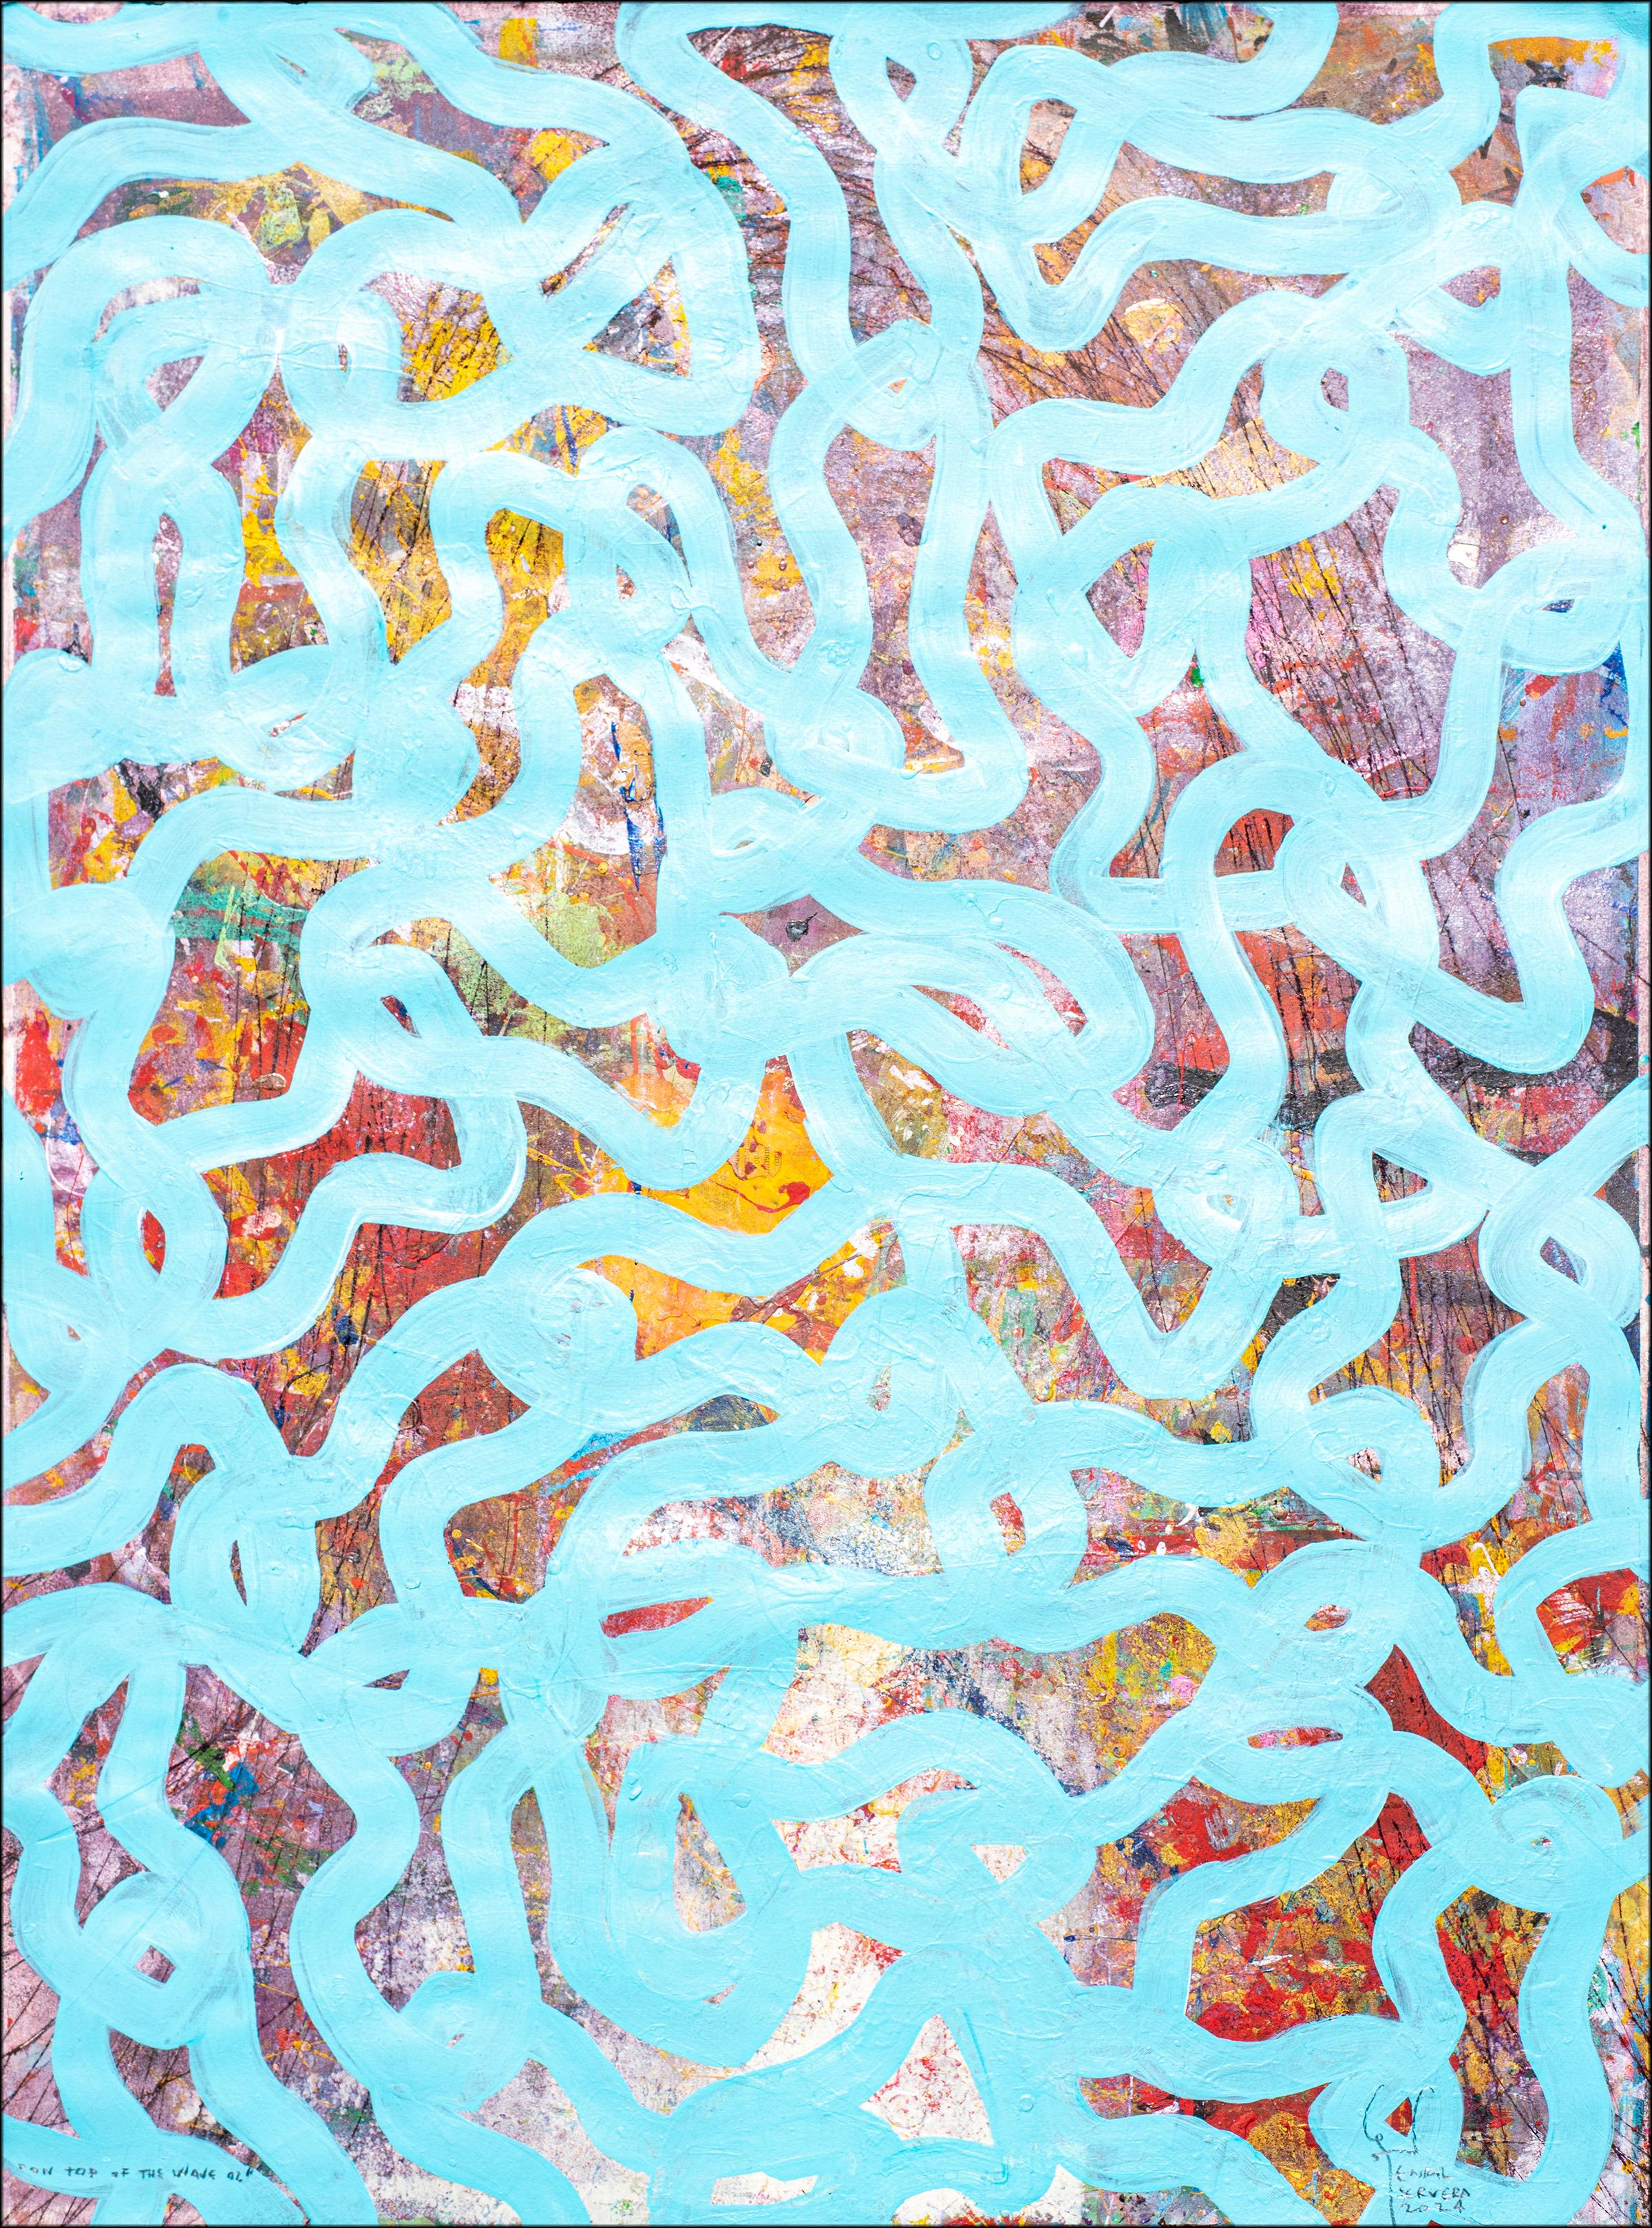 On Top of the Wave, Turquoise Fish Drawing Patterns, Subtle Background Seascape